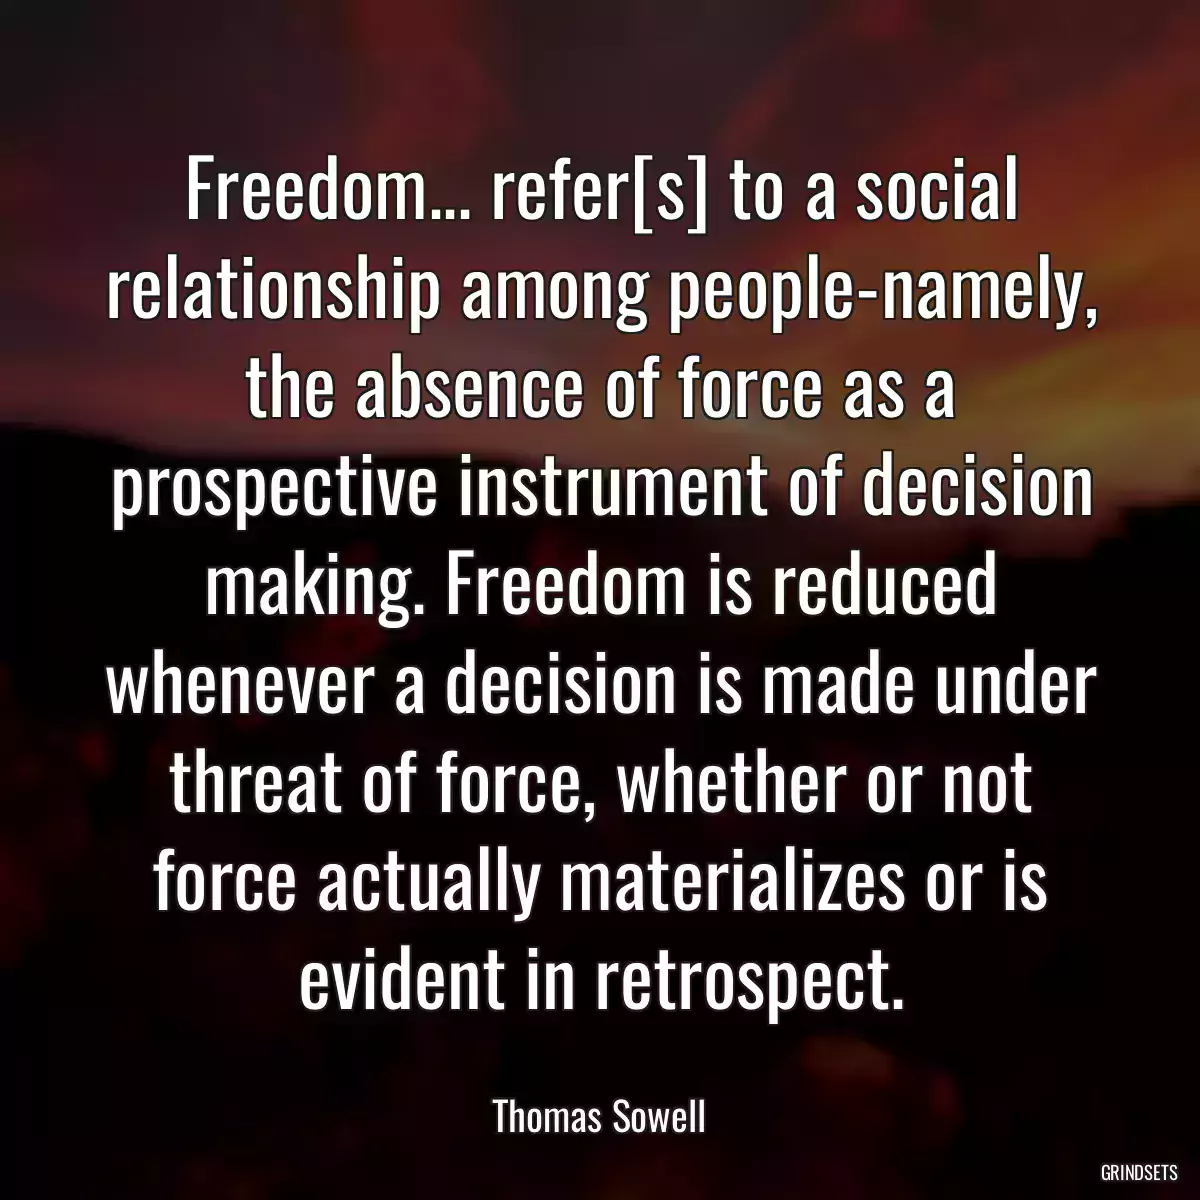 Freedom... refer[s] to a social relationship among people-namely, the absence of force as a prospective instrument of decision making. Freedom is reduced whenever a decision is made under threat of force, whether or not force actually materializes or is evident in retrospect.